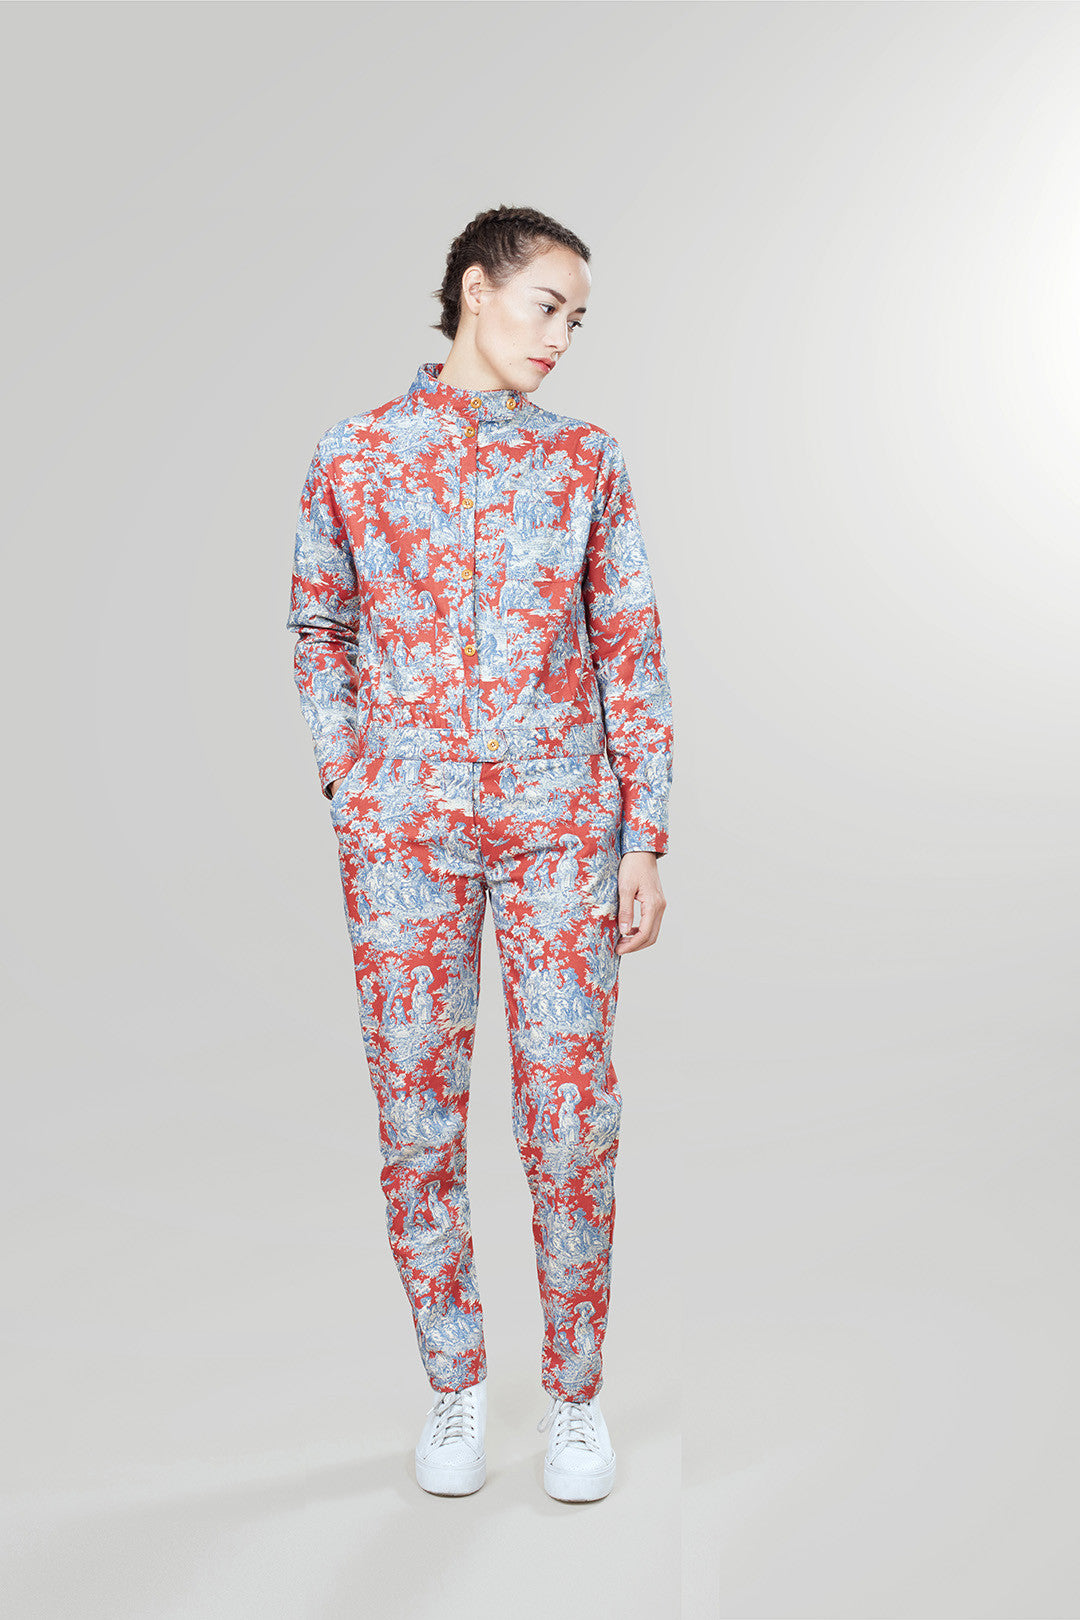 Churchill Siren Suit in Red Toile